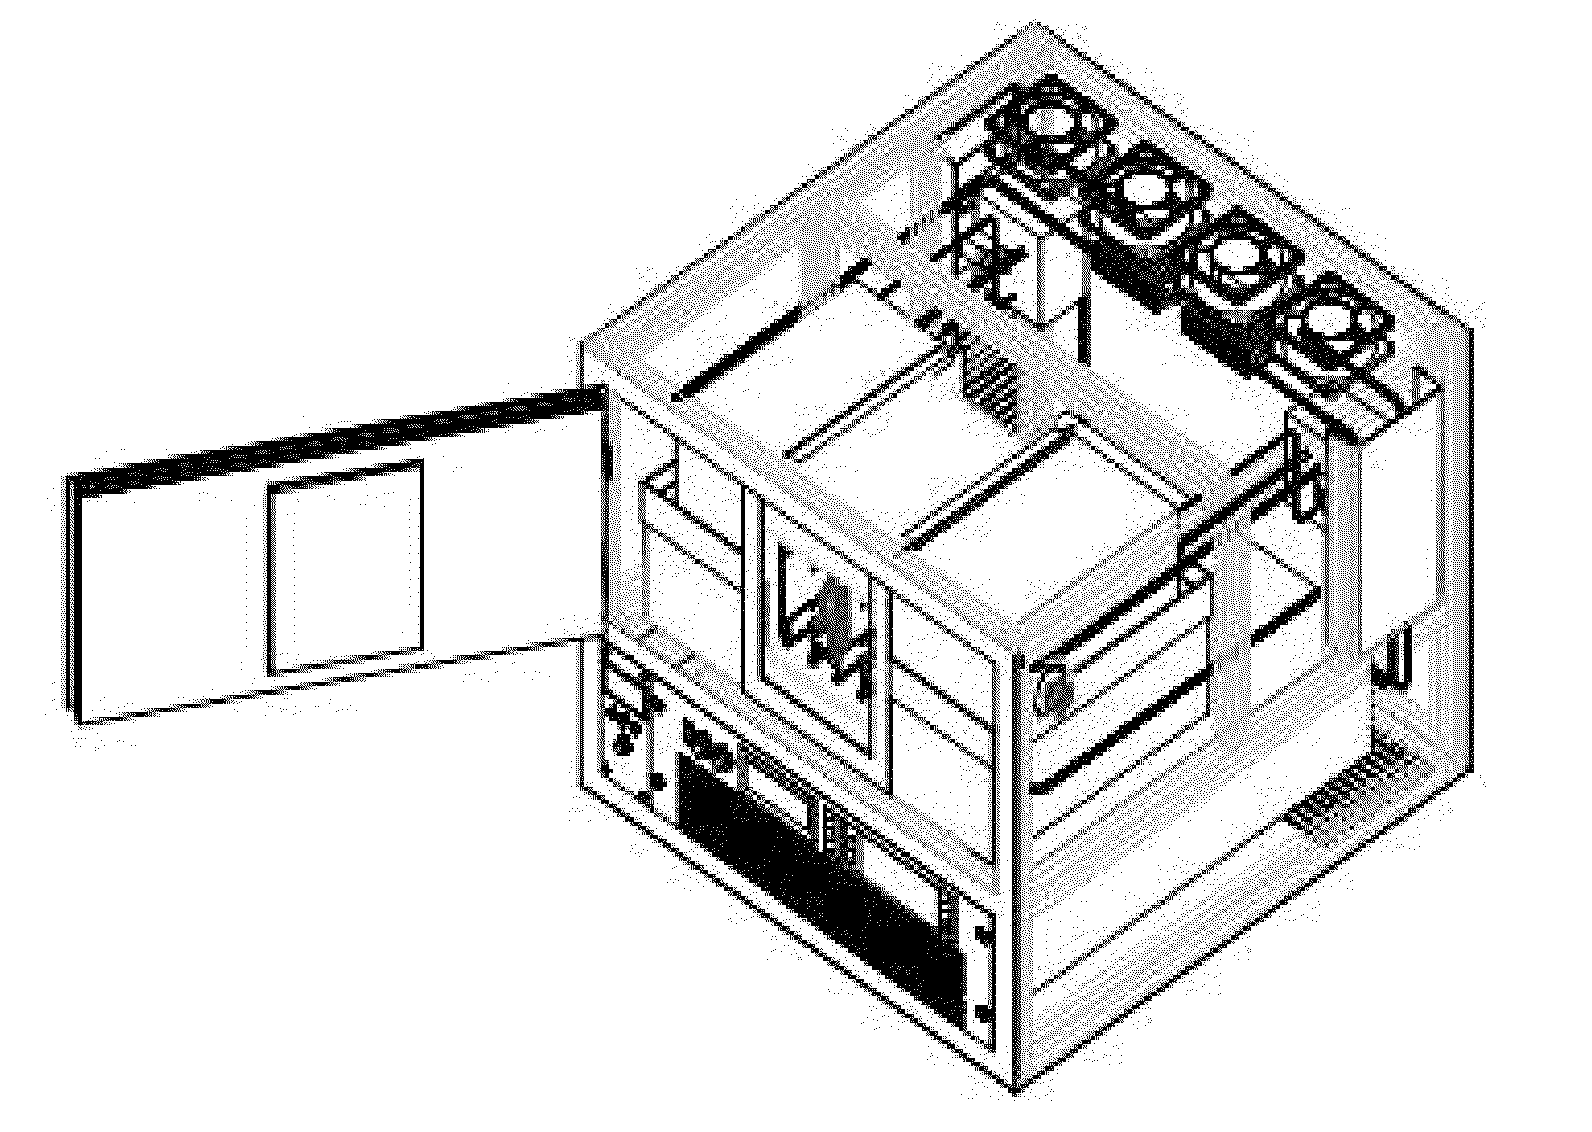 Self contained irradiation system using flat panel x-ray sources